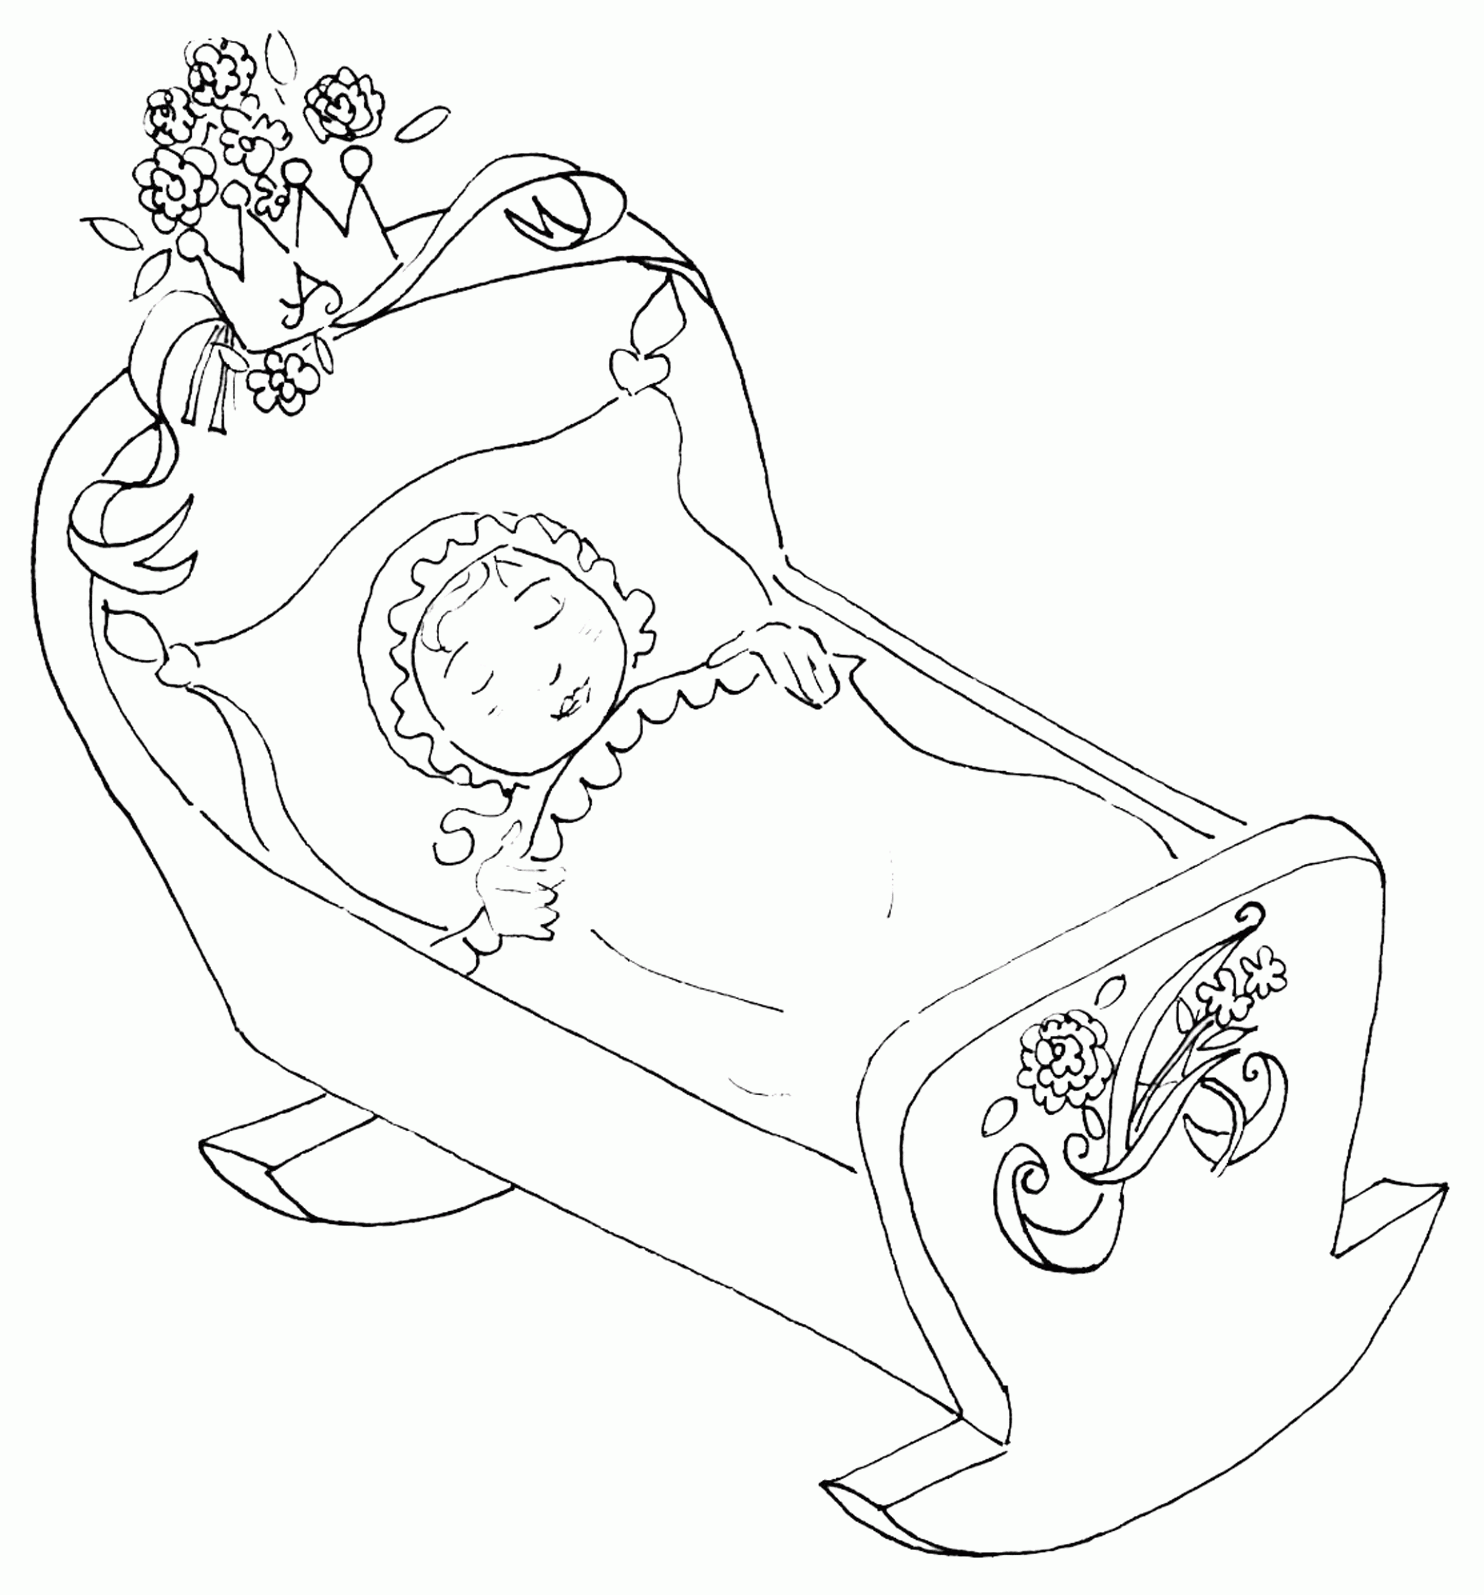 6 Pics Of Sleeping Baby Coloring Pages - Baby Sleeping Beauty